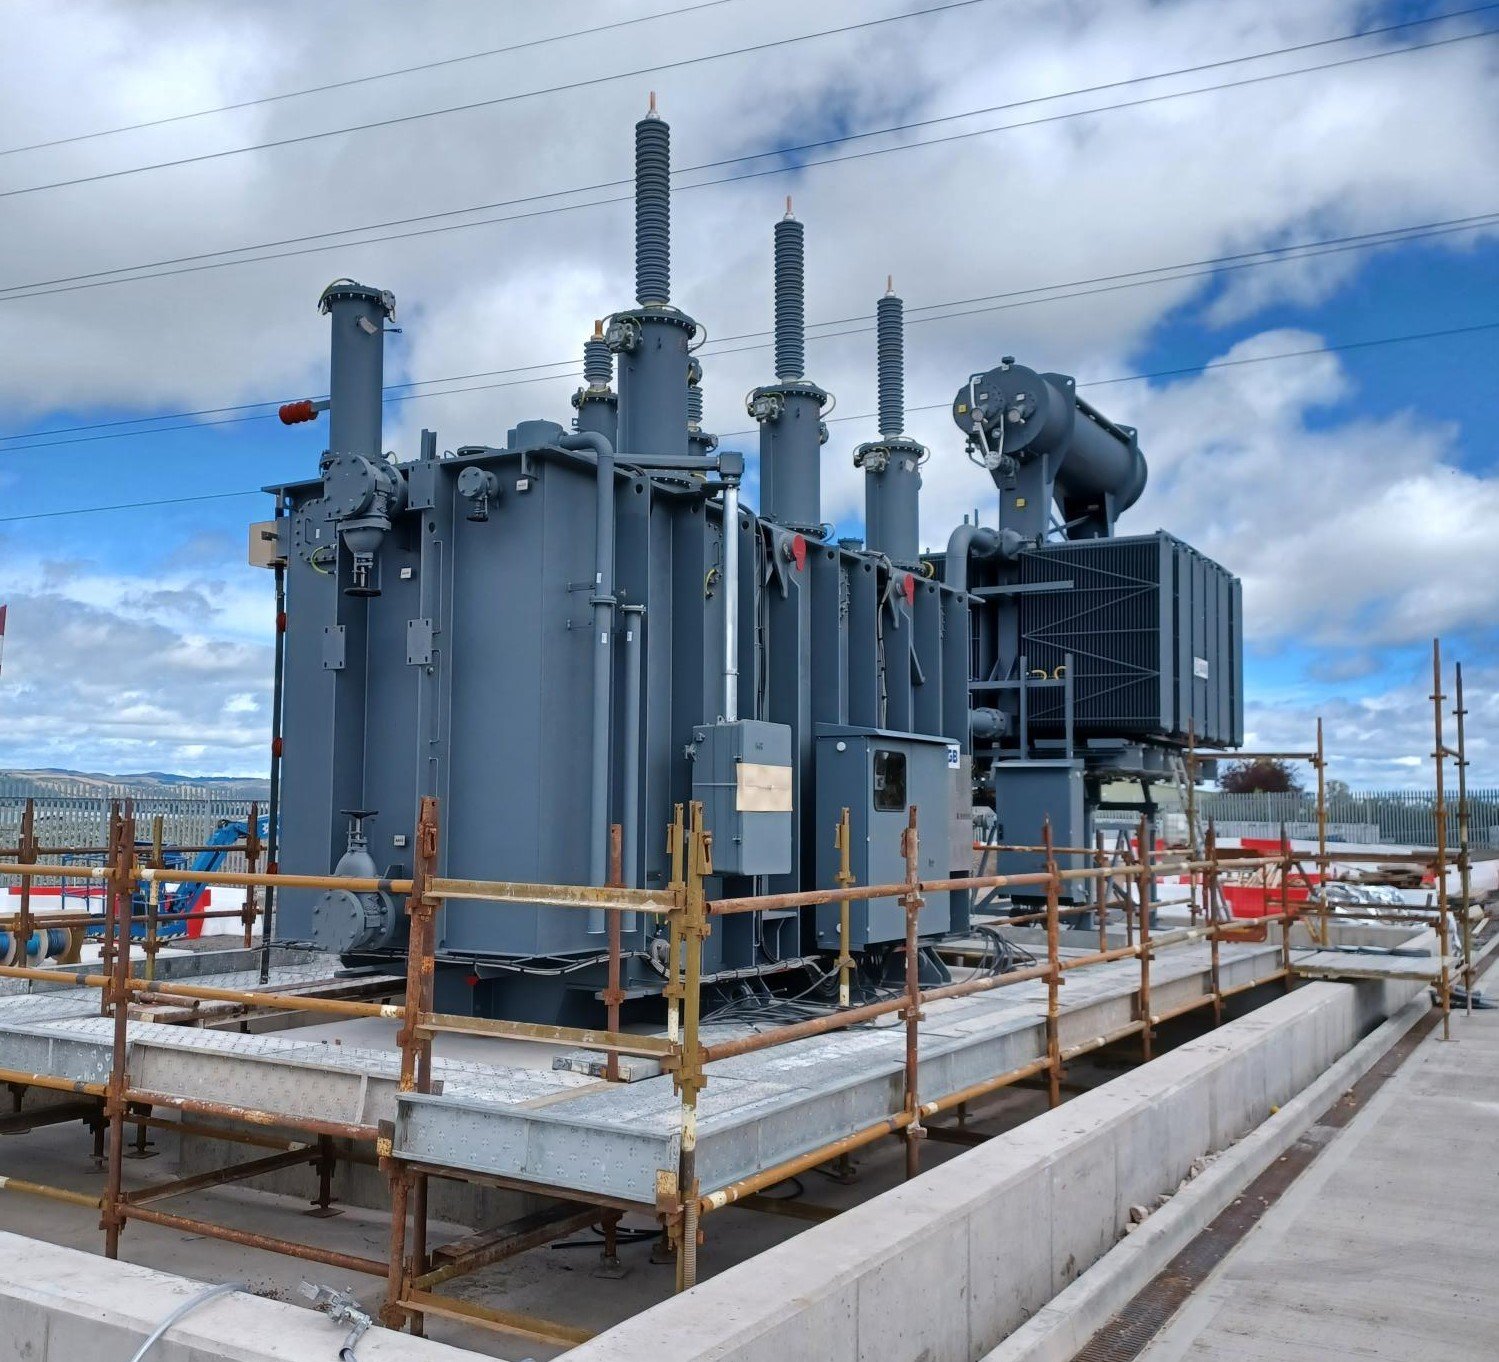 ssen-transmission_one-of-the-100-tonne-transformers-on-site-in-abernethy_cropped.jpg